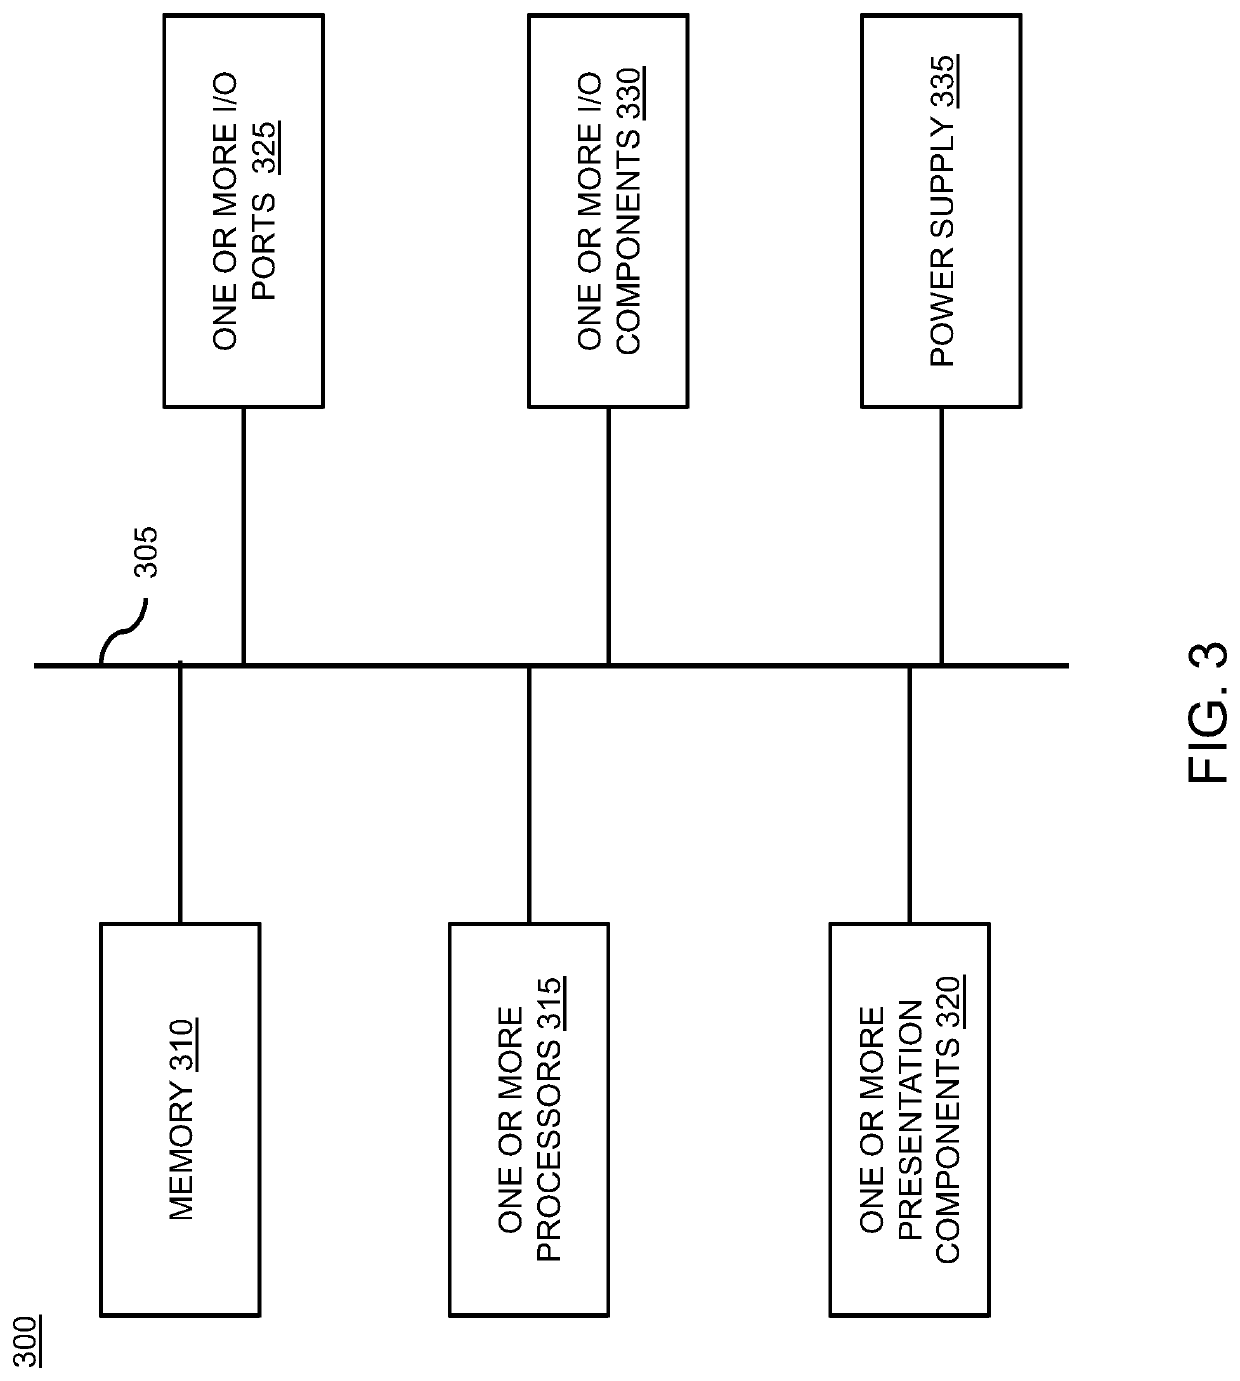 System and method for automatic sequencing of shipments